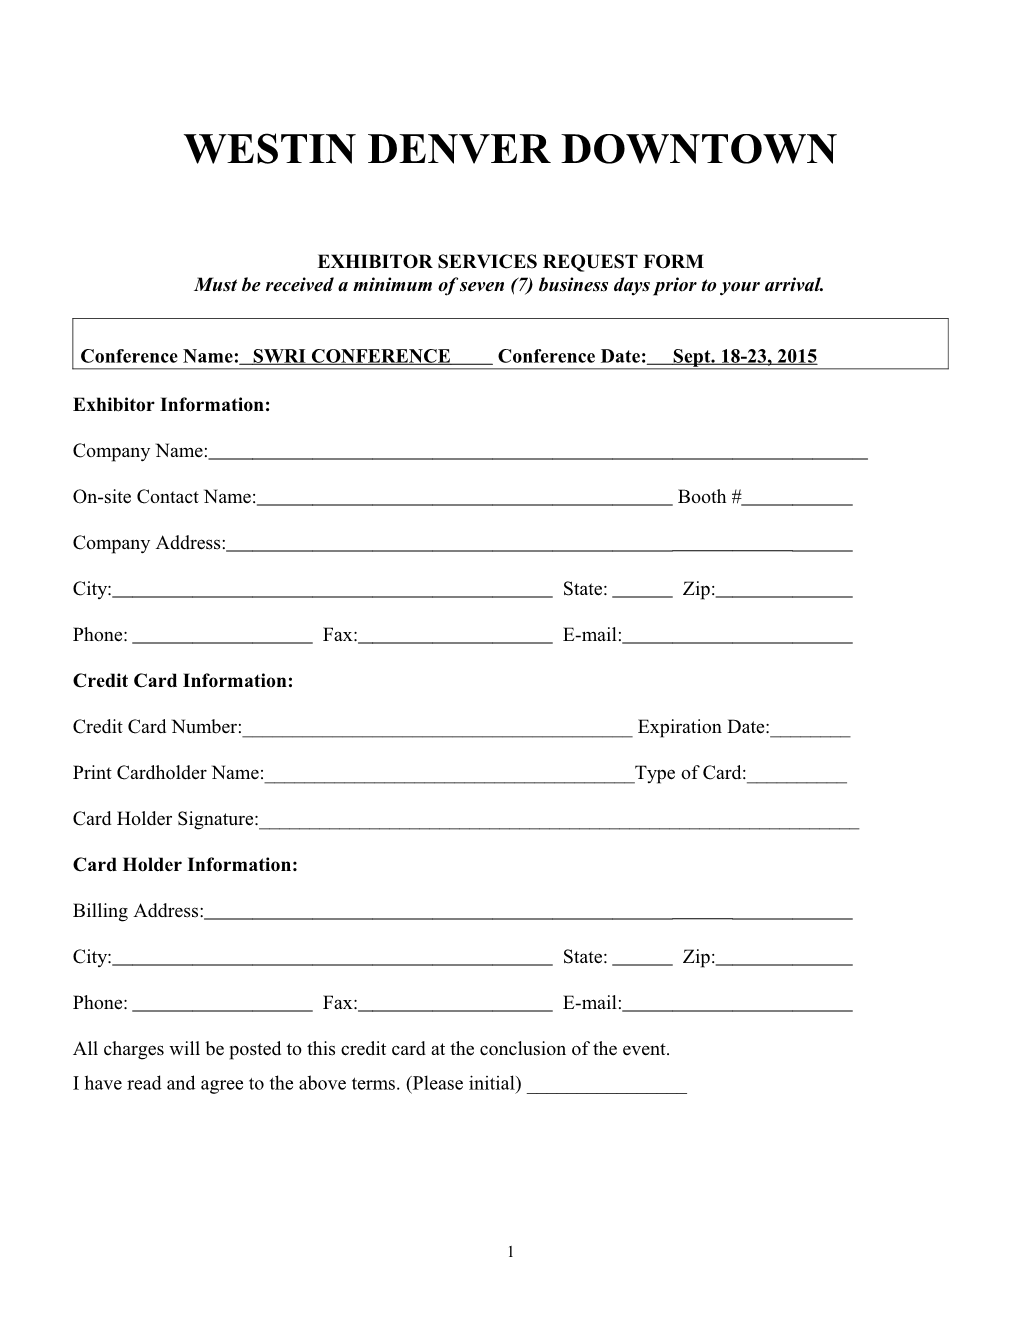 Exhibitor Services Request Form